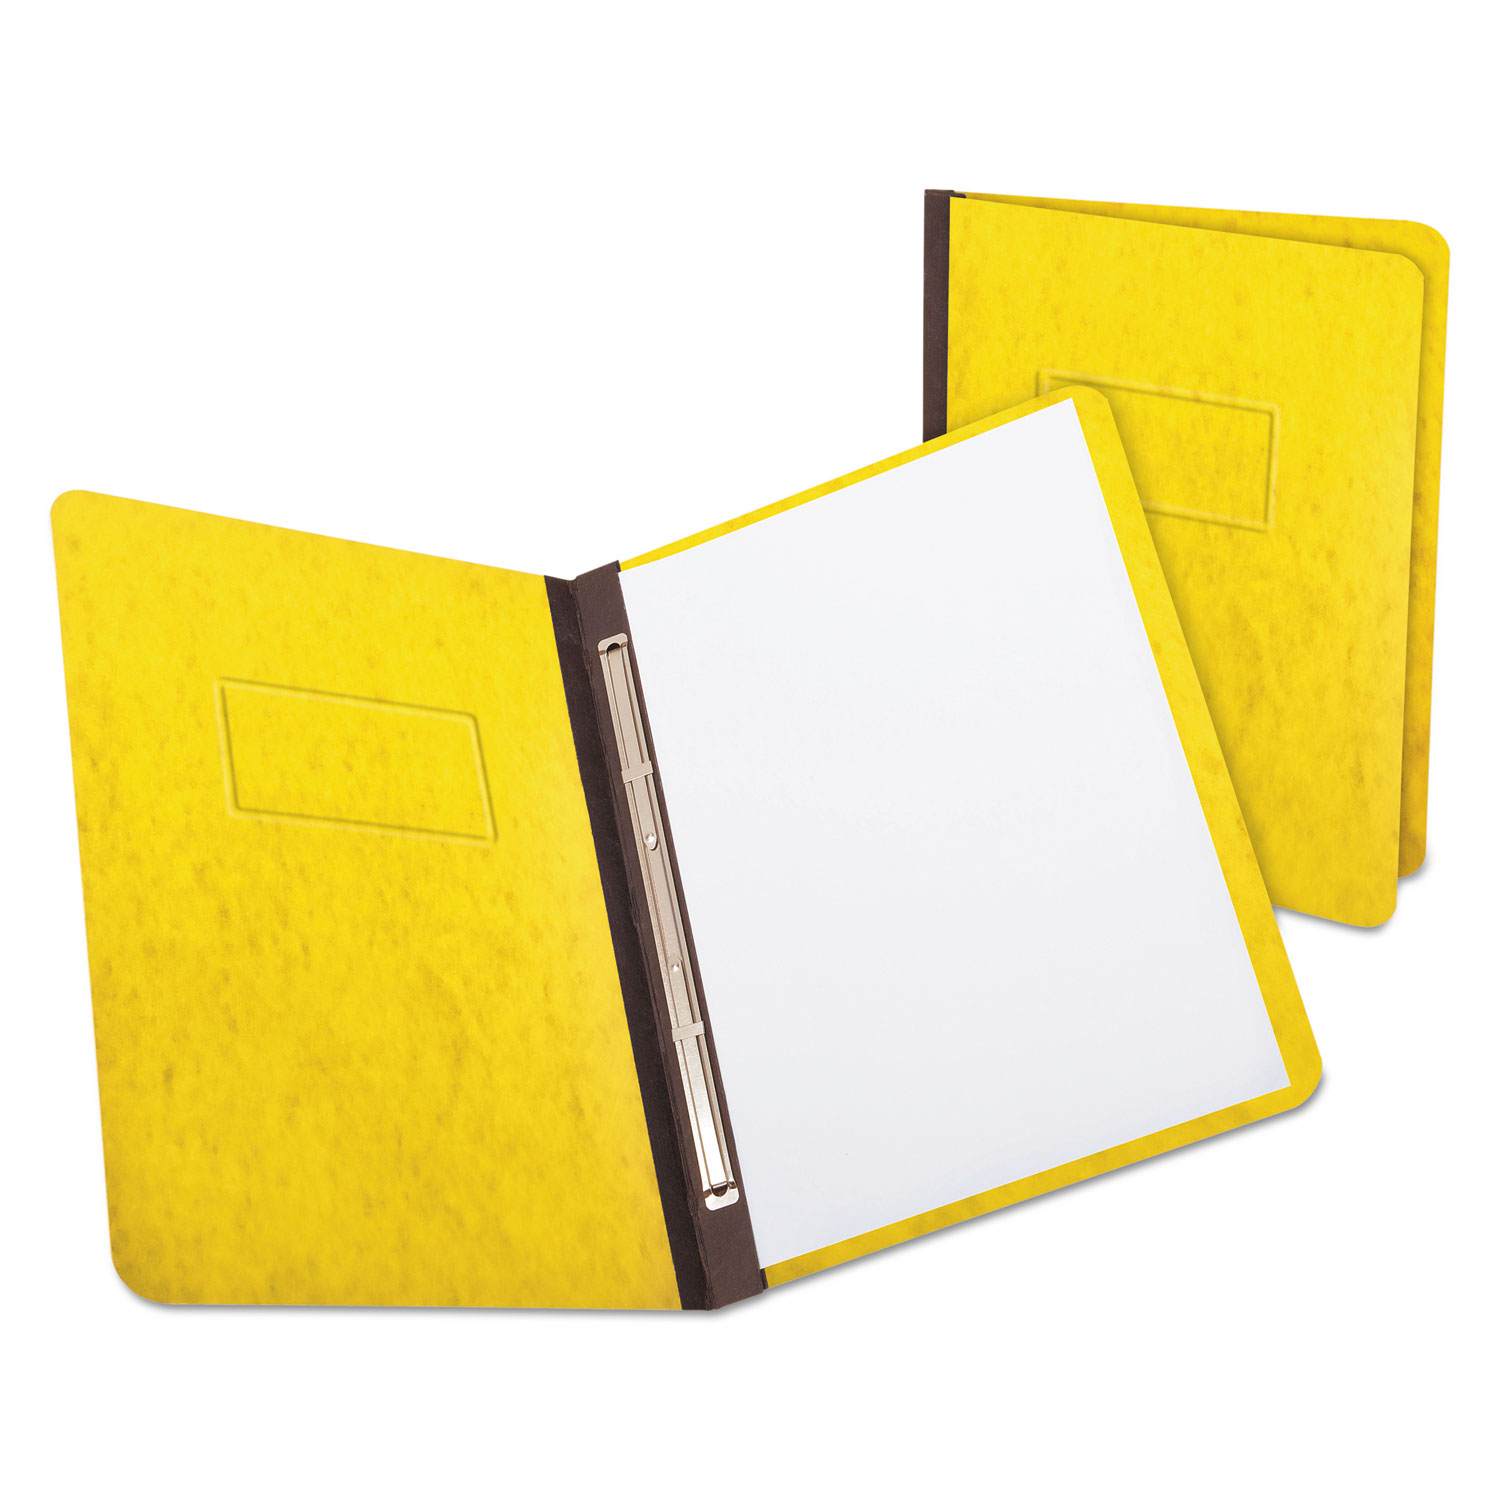  Oxford 12709 PressGuard Report Cover, Prong Clip, Letter, 3 Capacity, Yellow (OXF12709) 